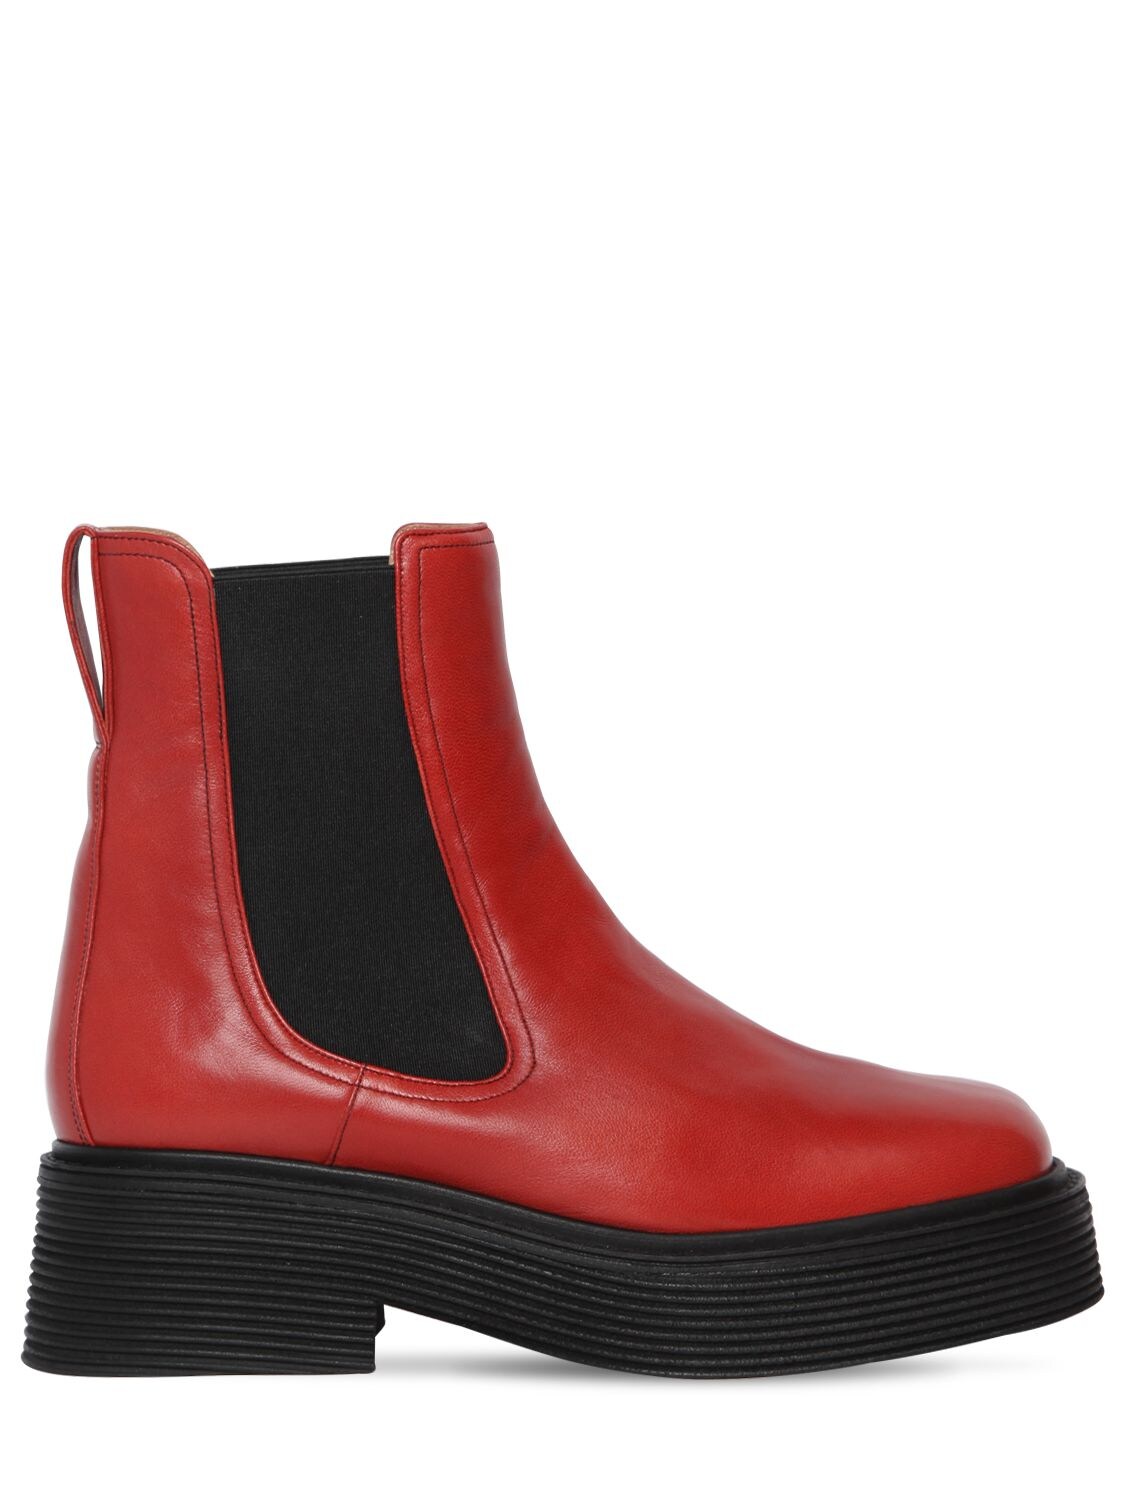 MARNI 40MM MILLERIGHE LEATHER ANKLE BOOTS,70I81K011-MDBSMZK1